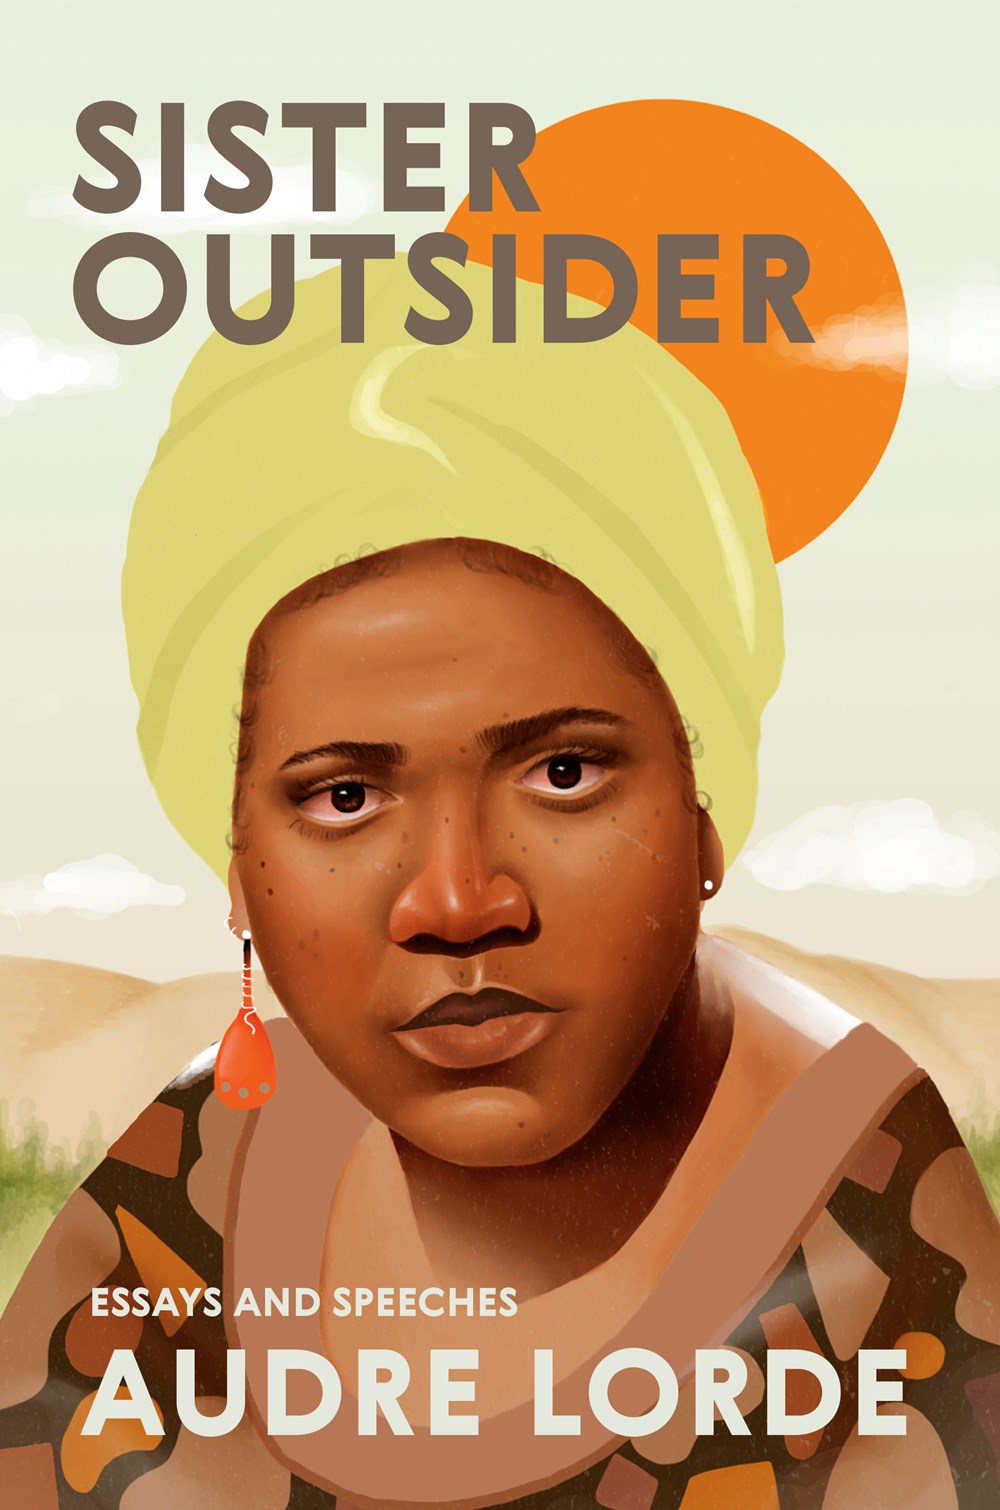 the sister outsider